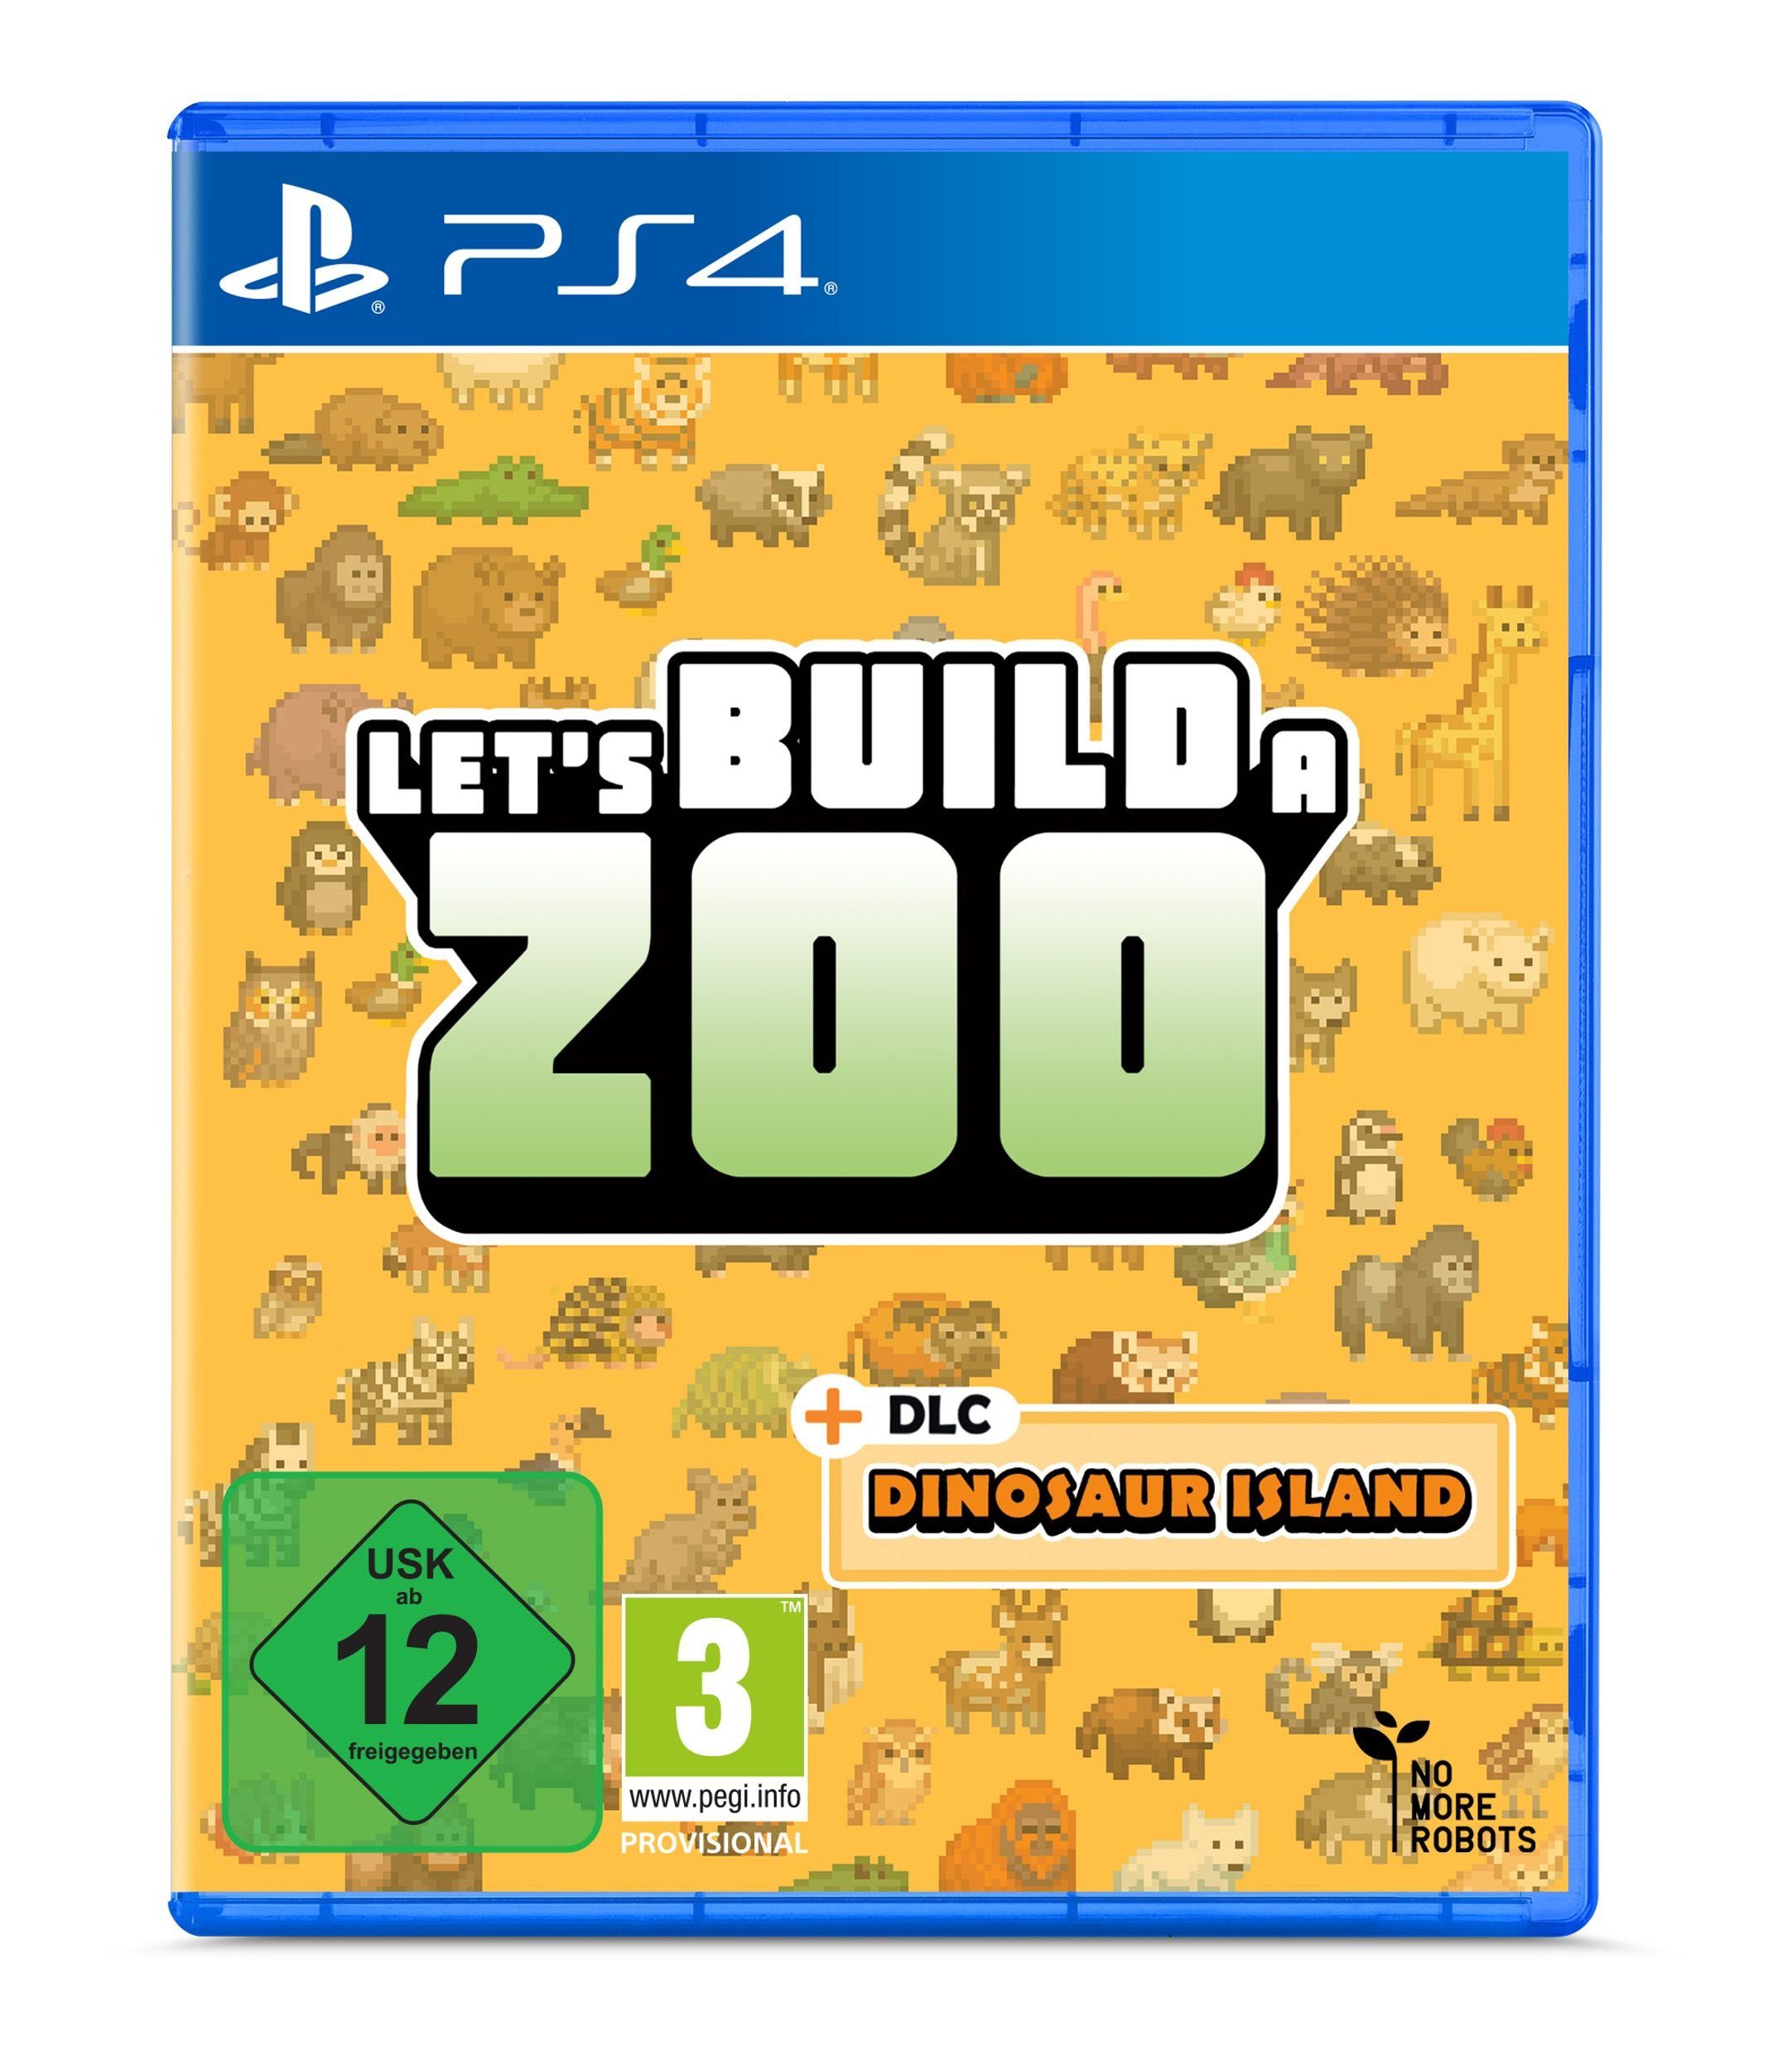 Let´s build a Zoo Playstation 4